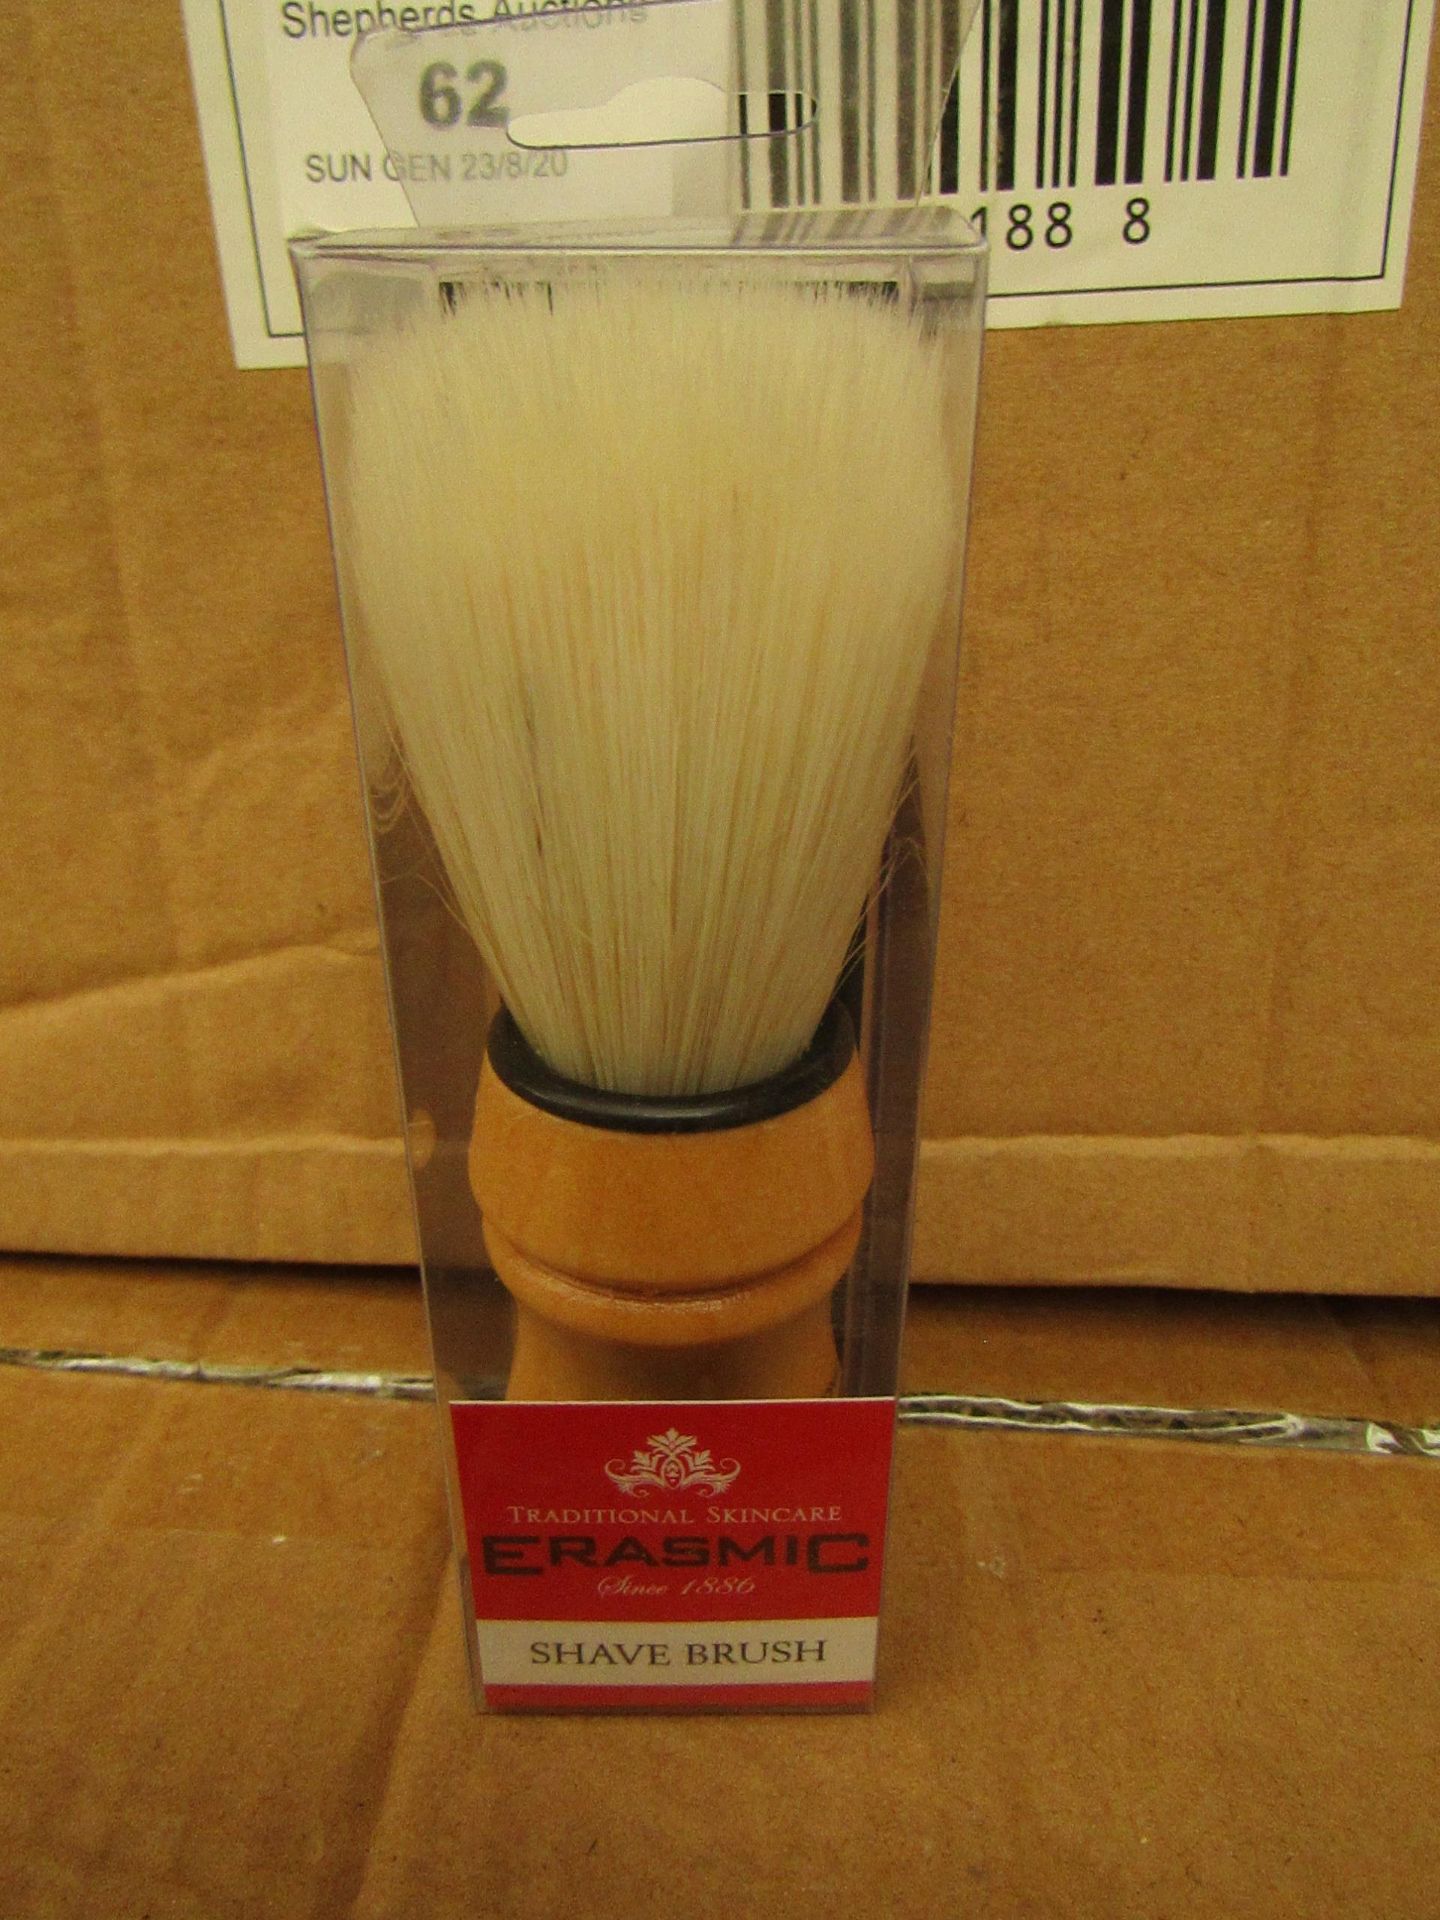 32 Packs of 3 Shave brushes - New & Packaged.